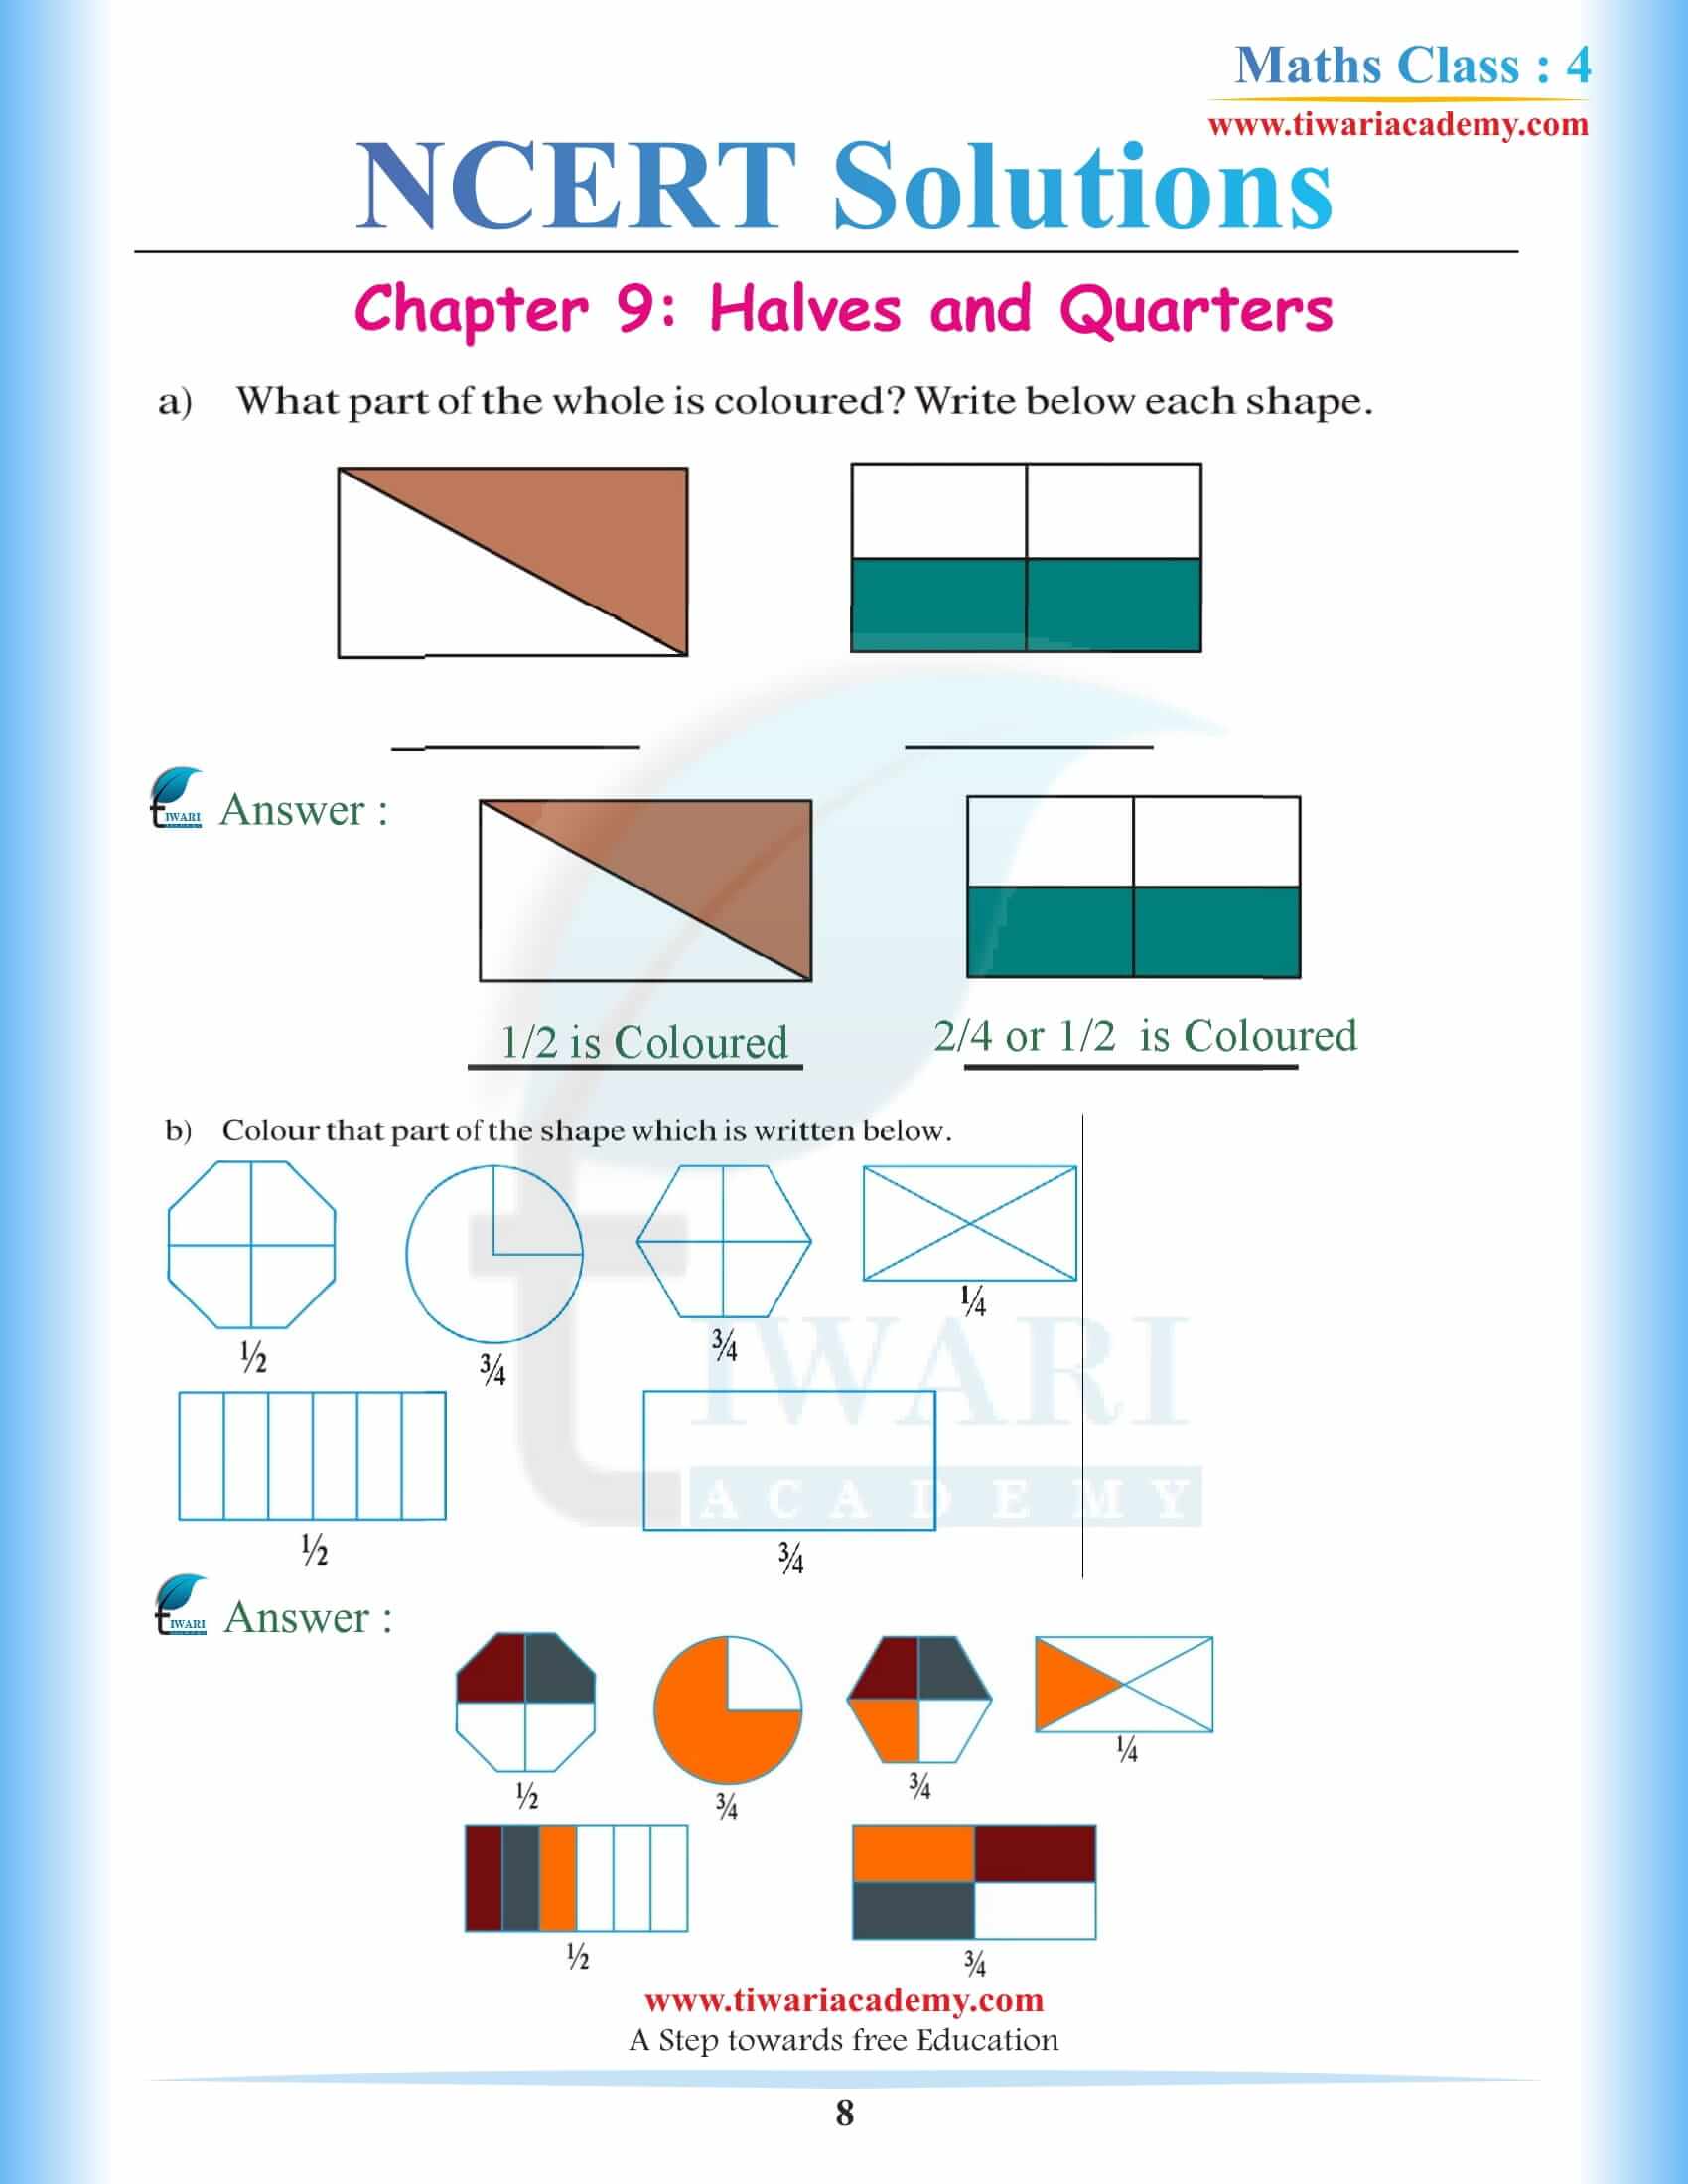 Class 4 Maths NCERT Chapter 9 Solutions in PDF